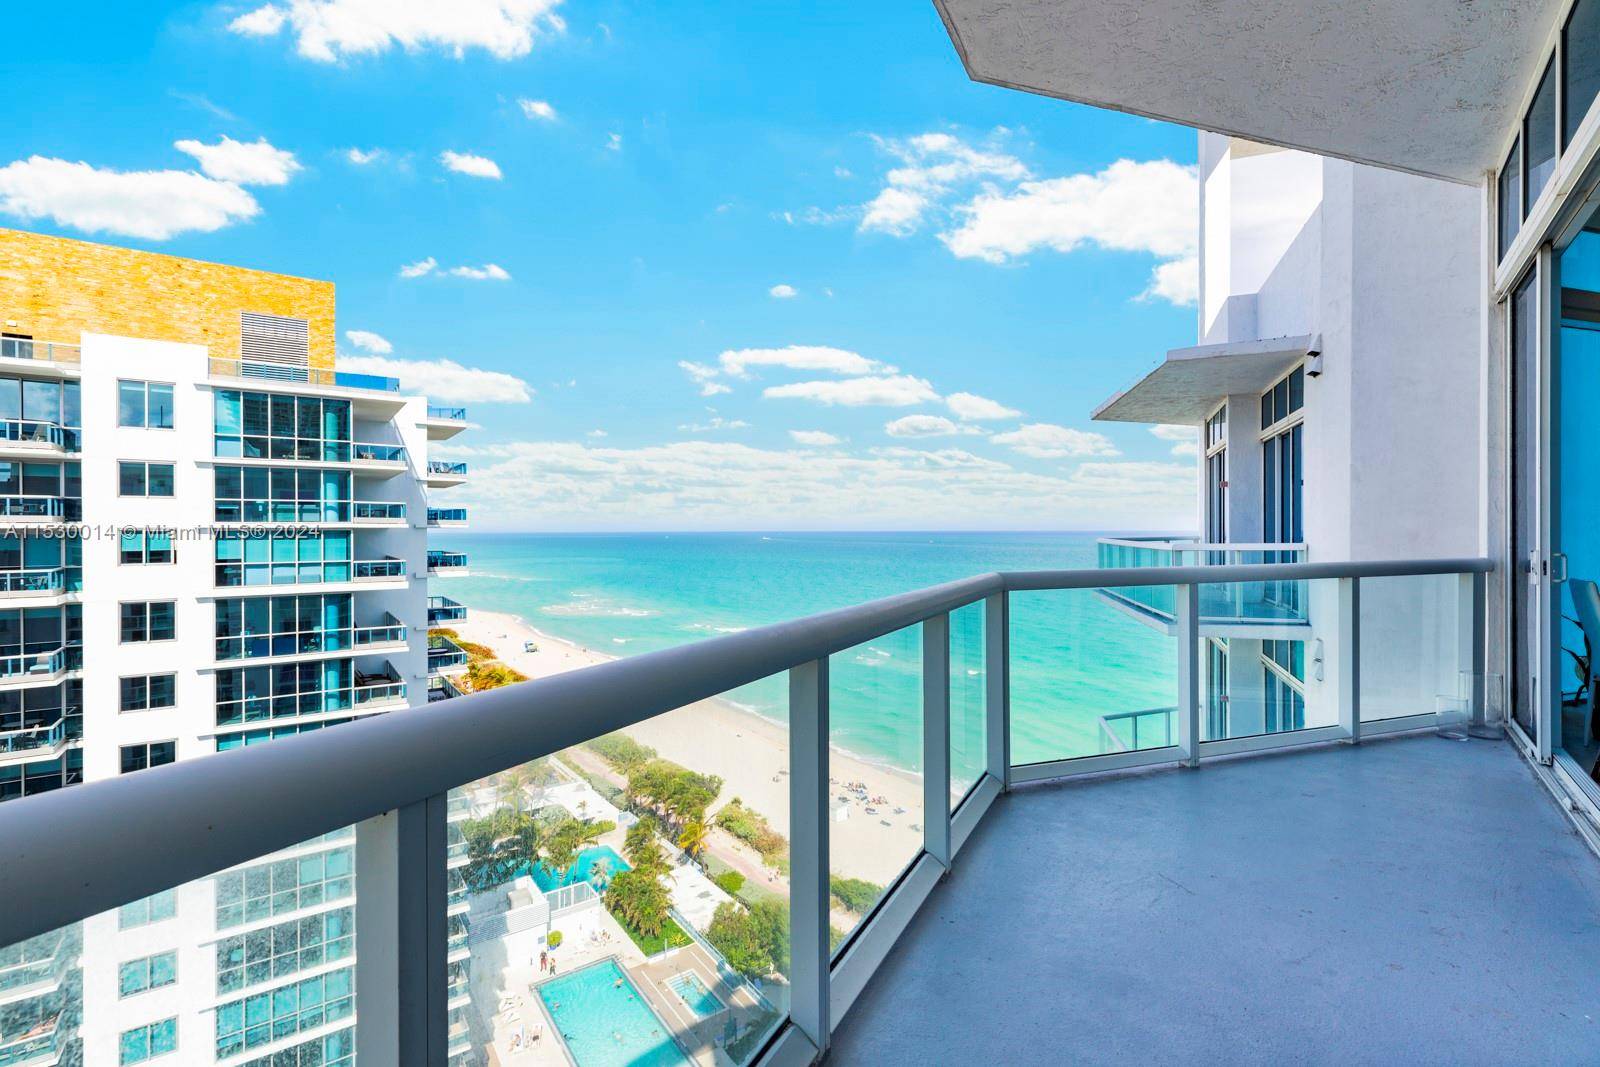 This 1 bed, 1. 5 bath penthouse, boasts direct ocean views, through its floor to ceiling windows in the Bel Aire on the Ocean Condominium.